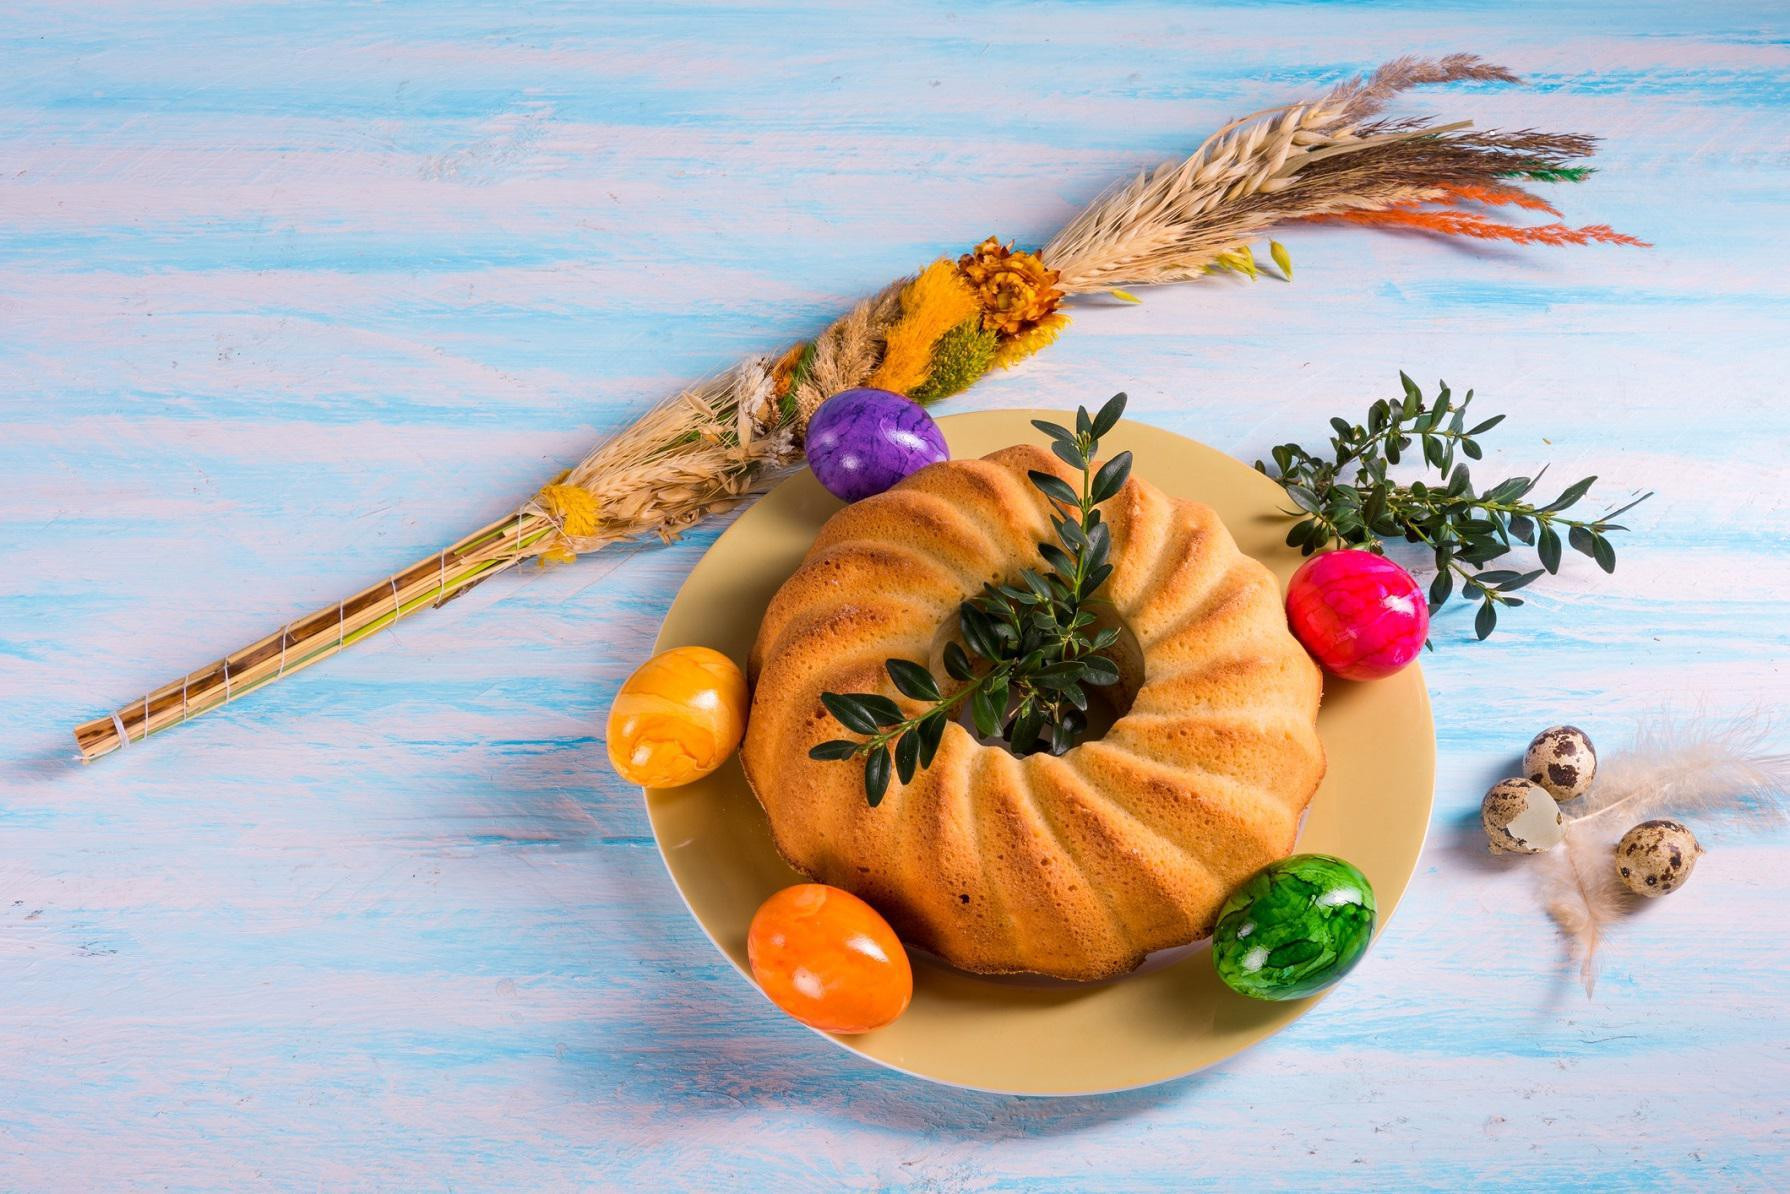 Easter Food Traditions
 8 Interesting Easter Food Traditions From Around the World